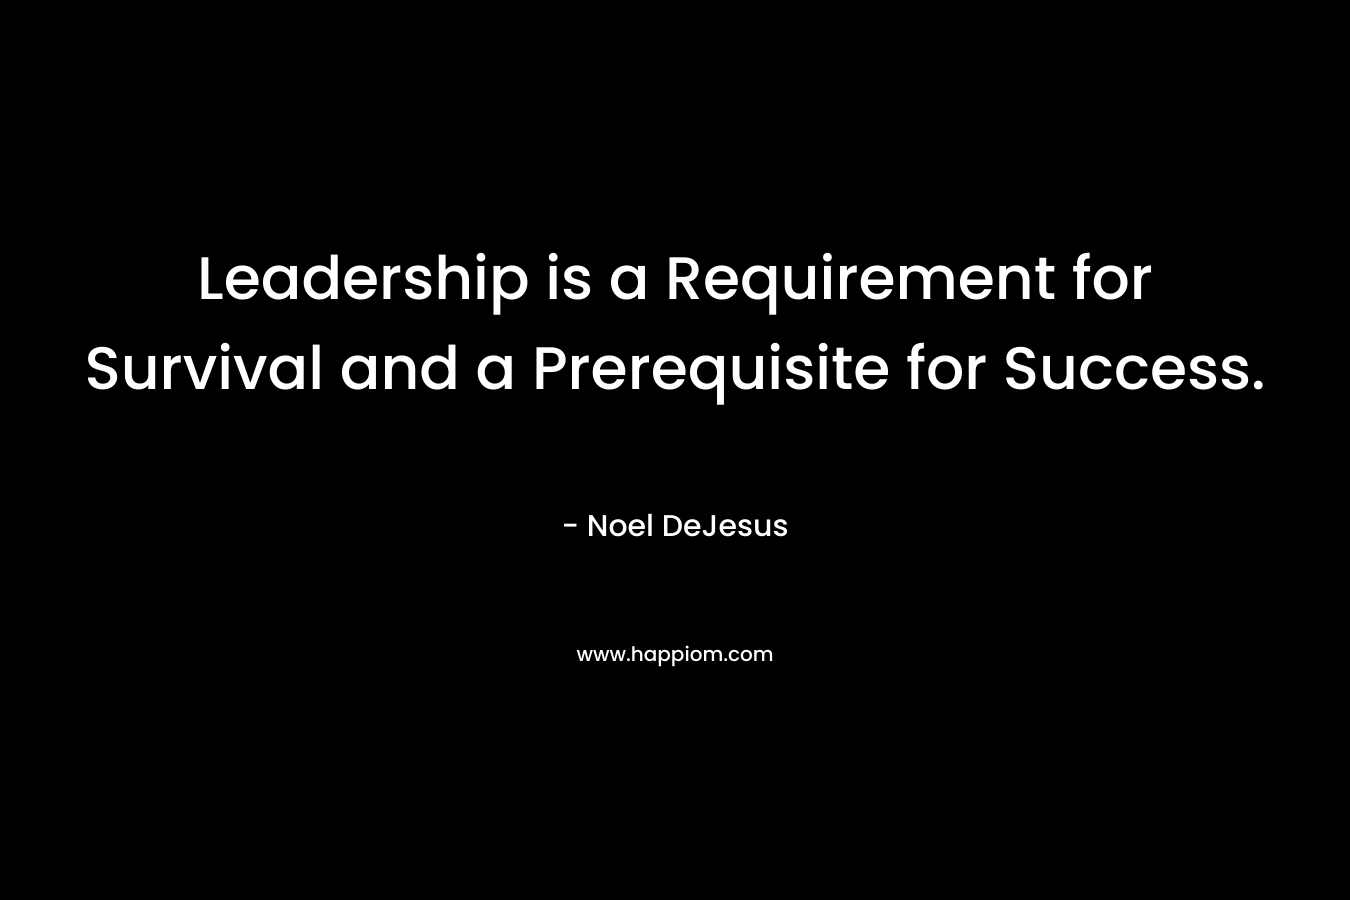 Leadership is a Requirement for Survival and a Prerequisite for Success. – Noel DeJesus